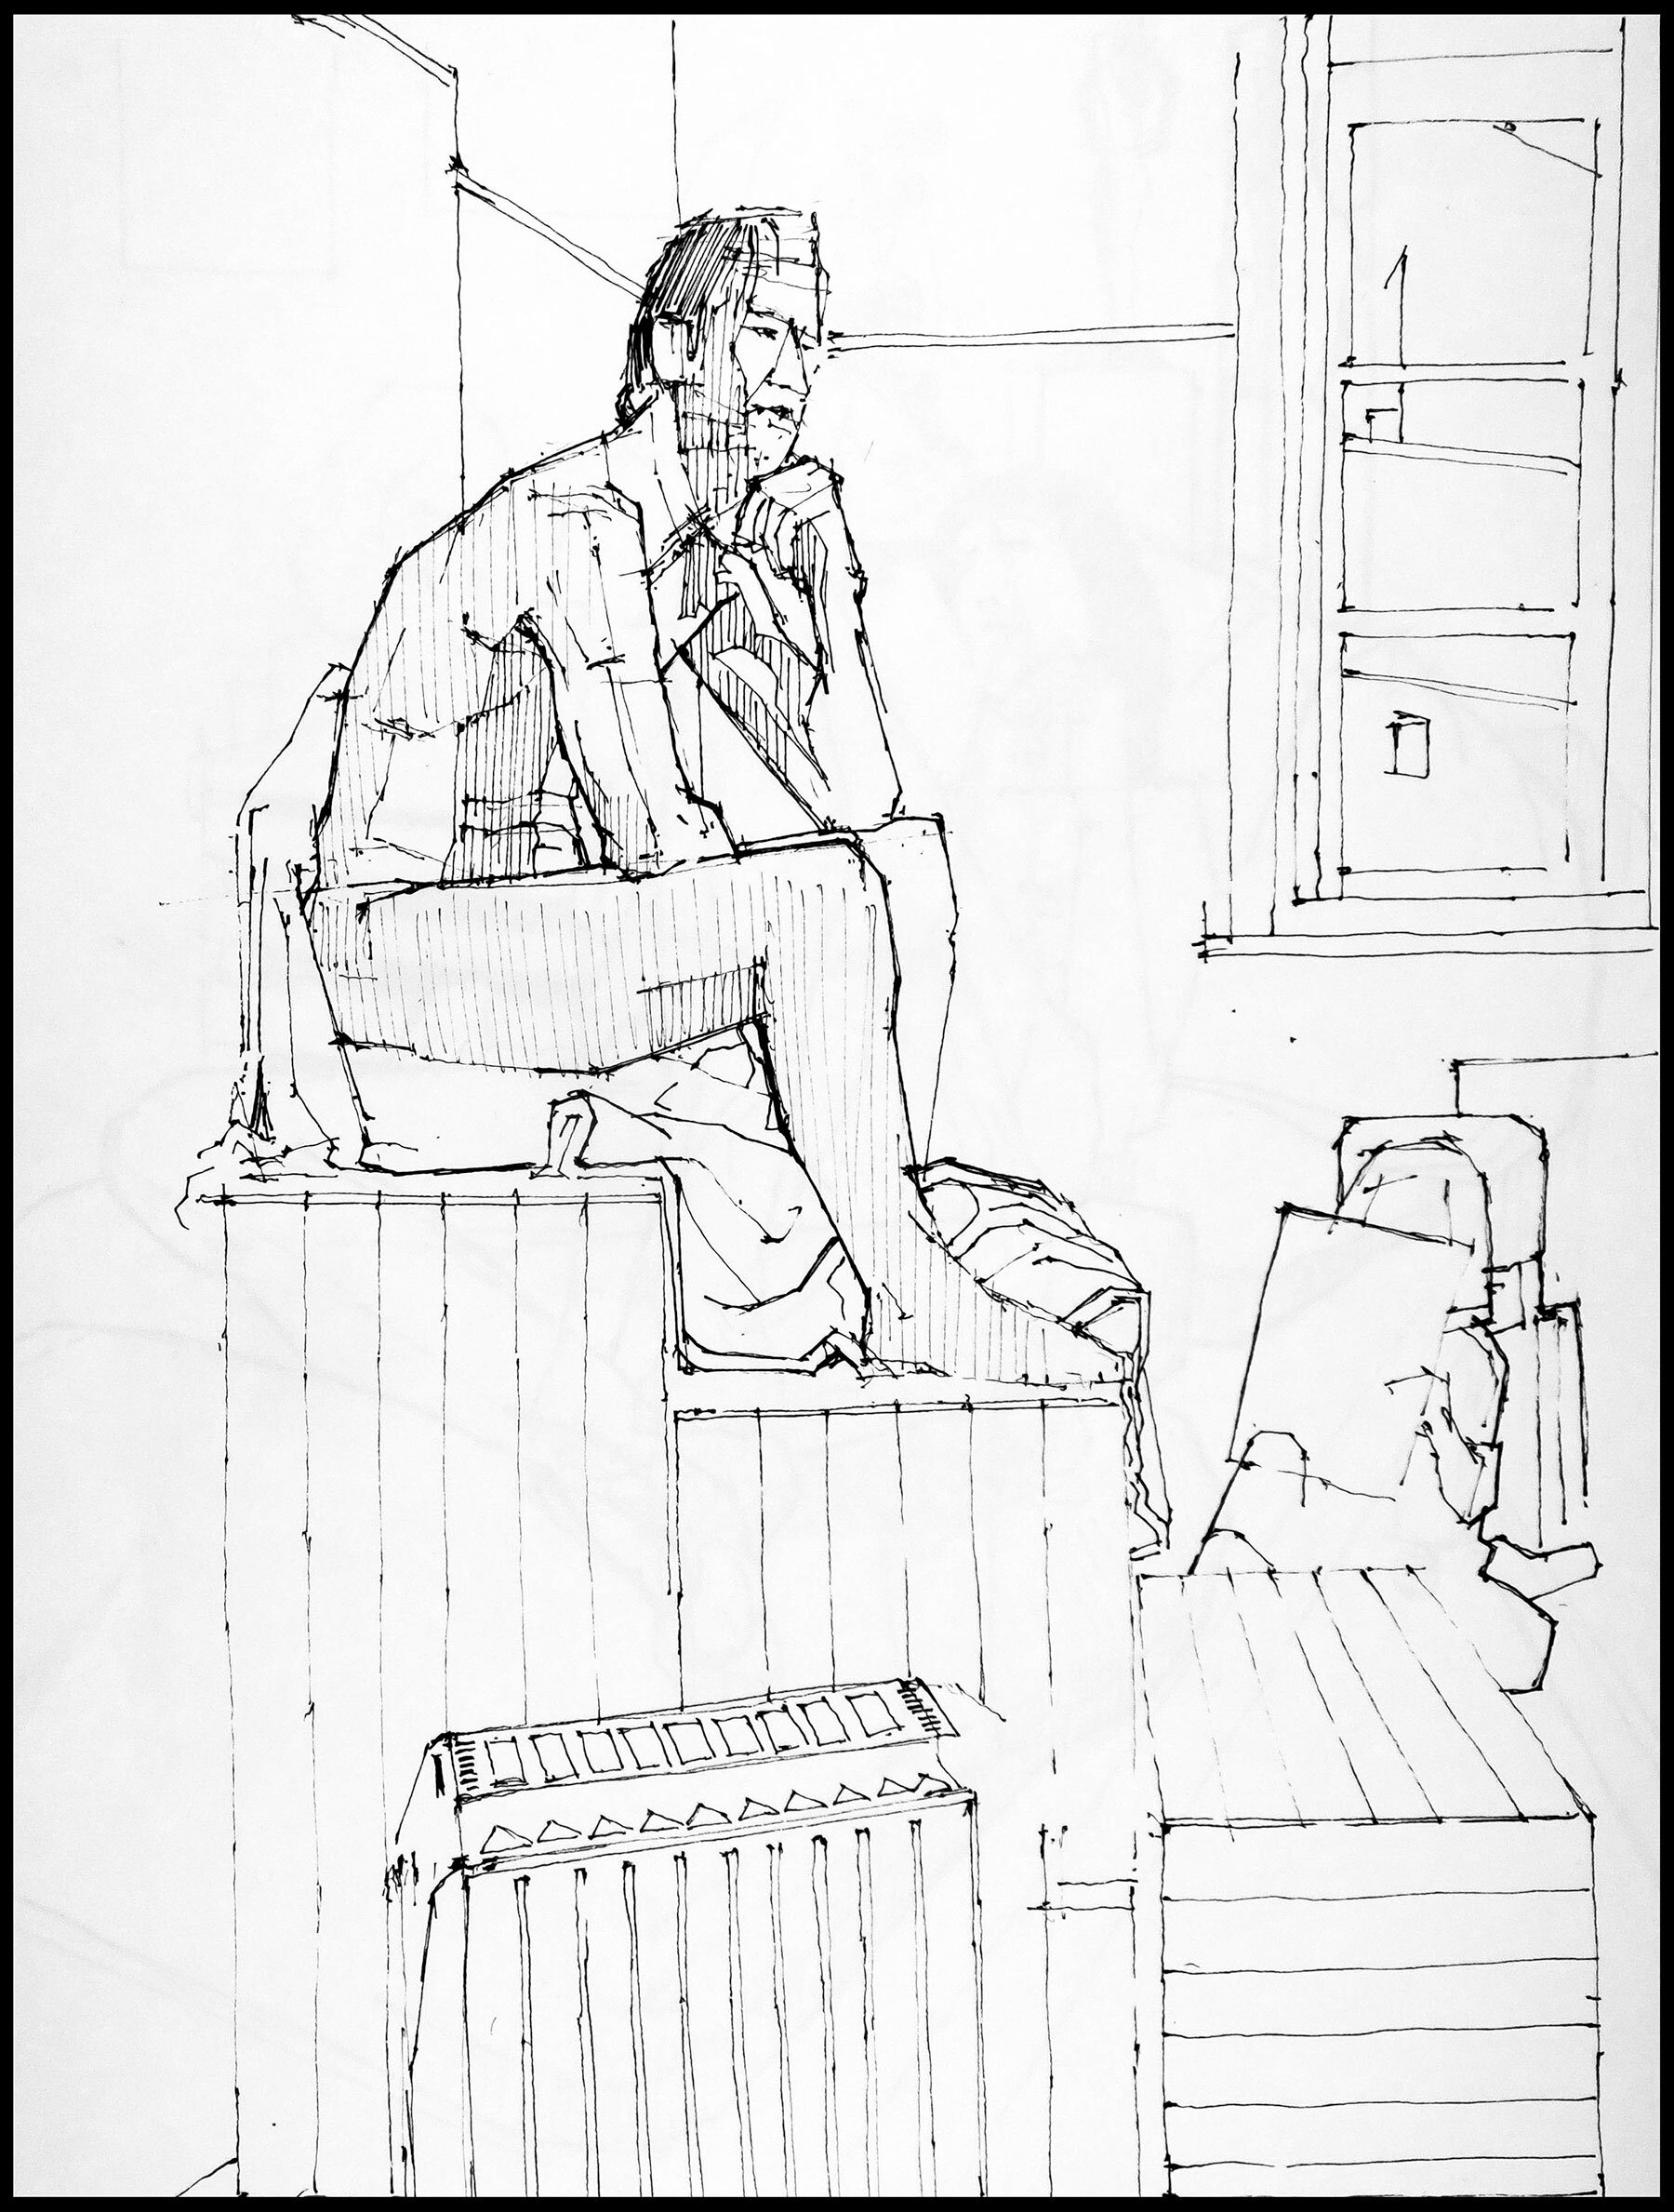 Andy seated (Copy) (Copy)